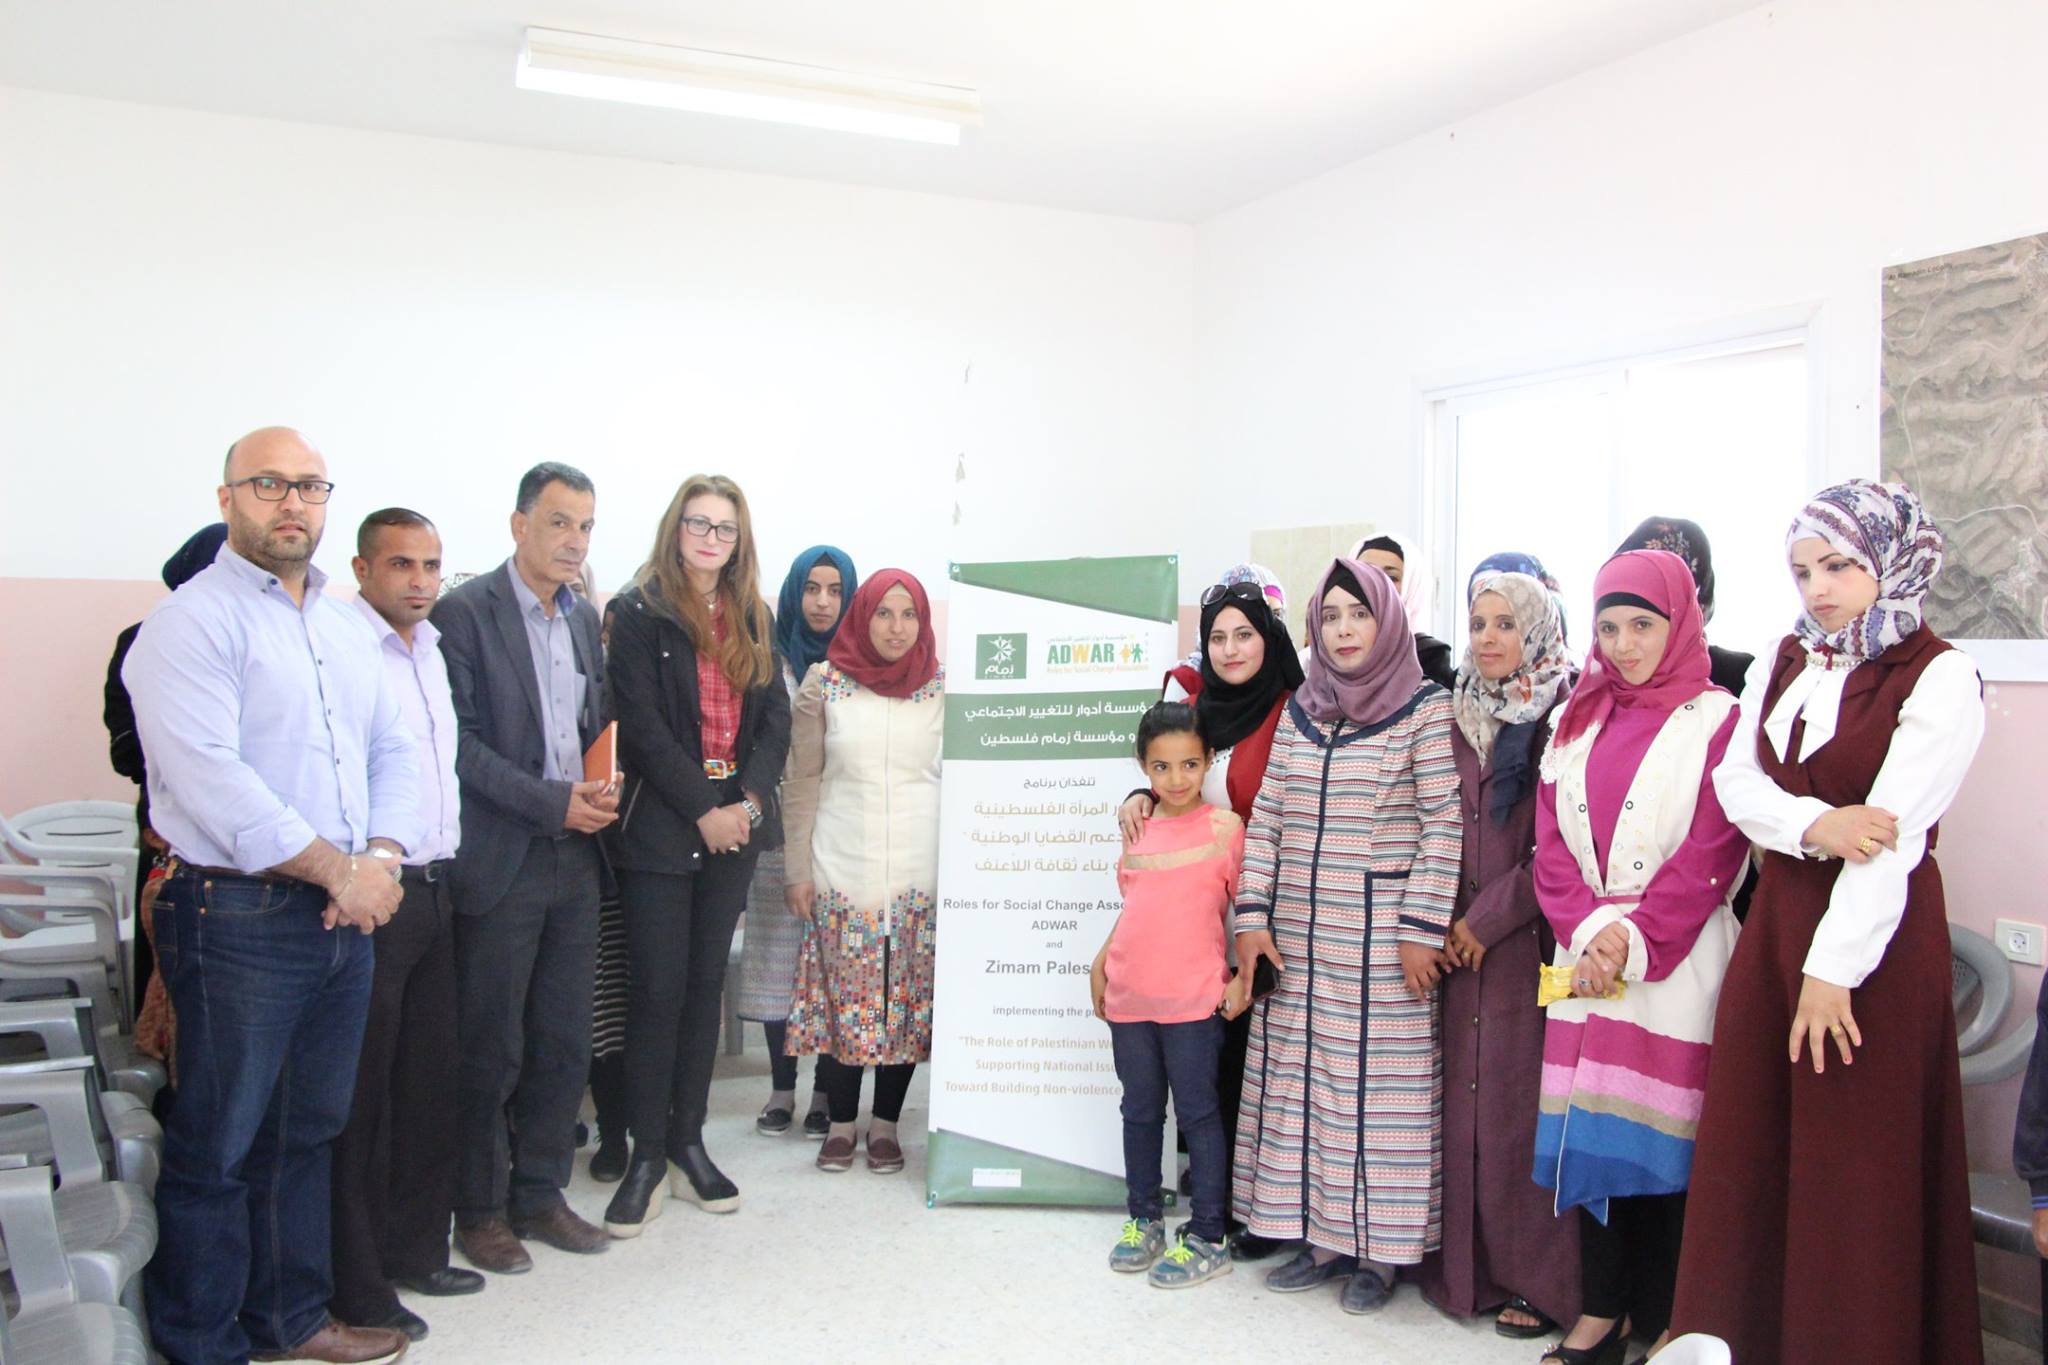  ADWAR Association with Zimam Palestine implemented a seminar entitled the role of women and their social activity in protecting the national project.